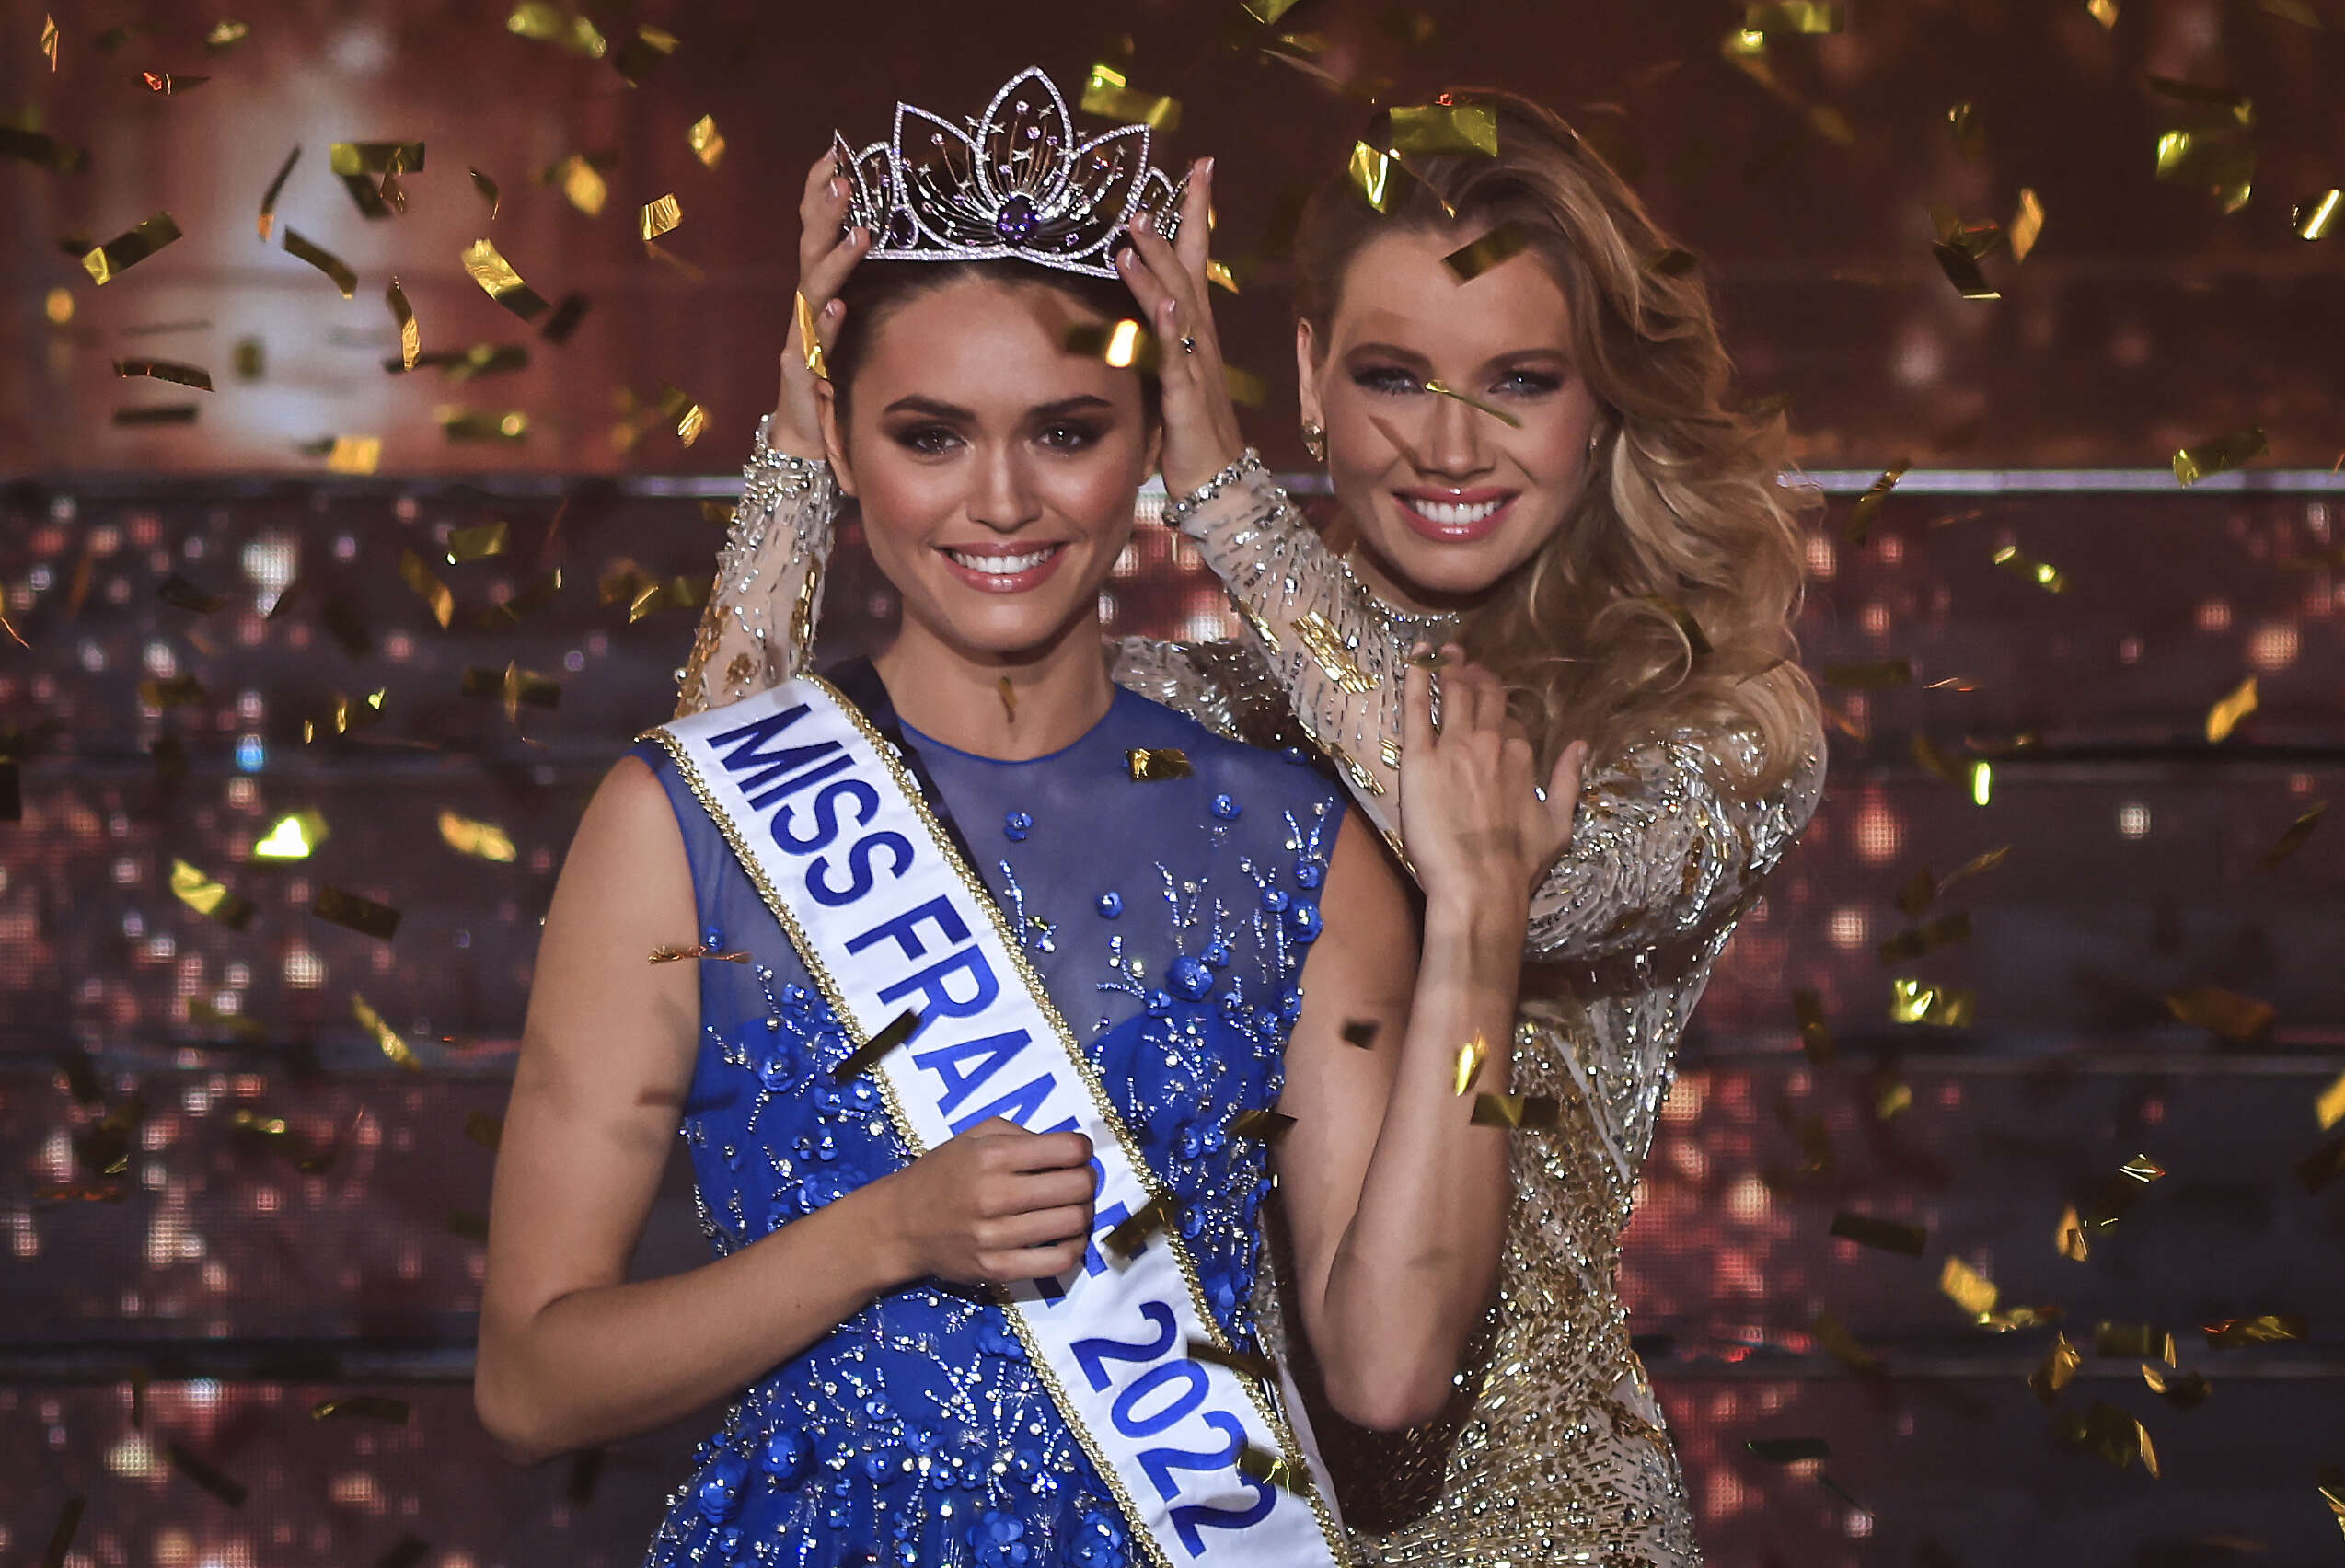 Miss Ile-de-France Diane Leyre is crowned by Miss France 2021 Amandine Petit at the end of the the Miss France 2022 beauty contest in Caen, on December 11, 2021. (Photo by Sameer Al-DOUMY / AFP)